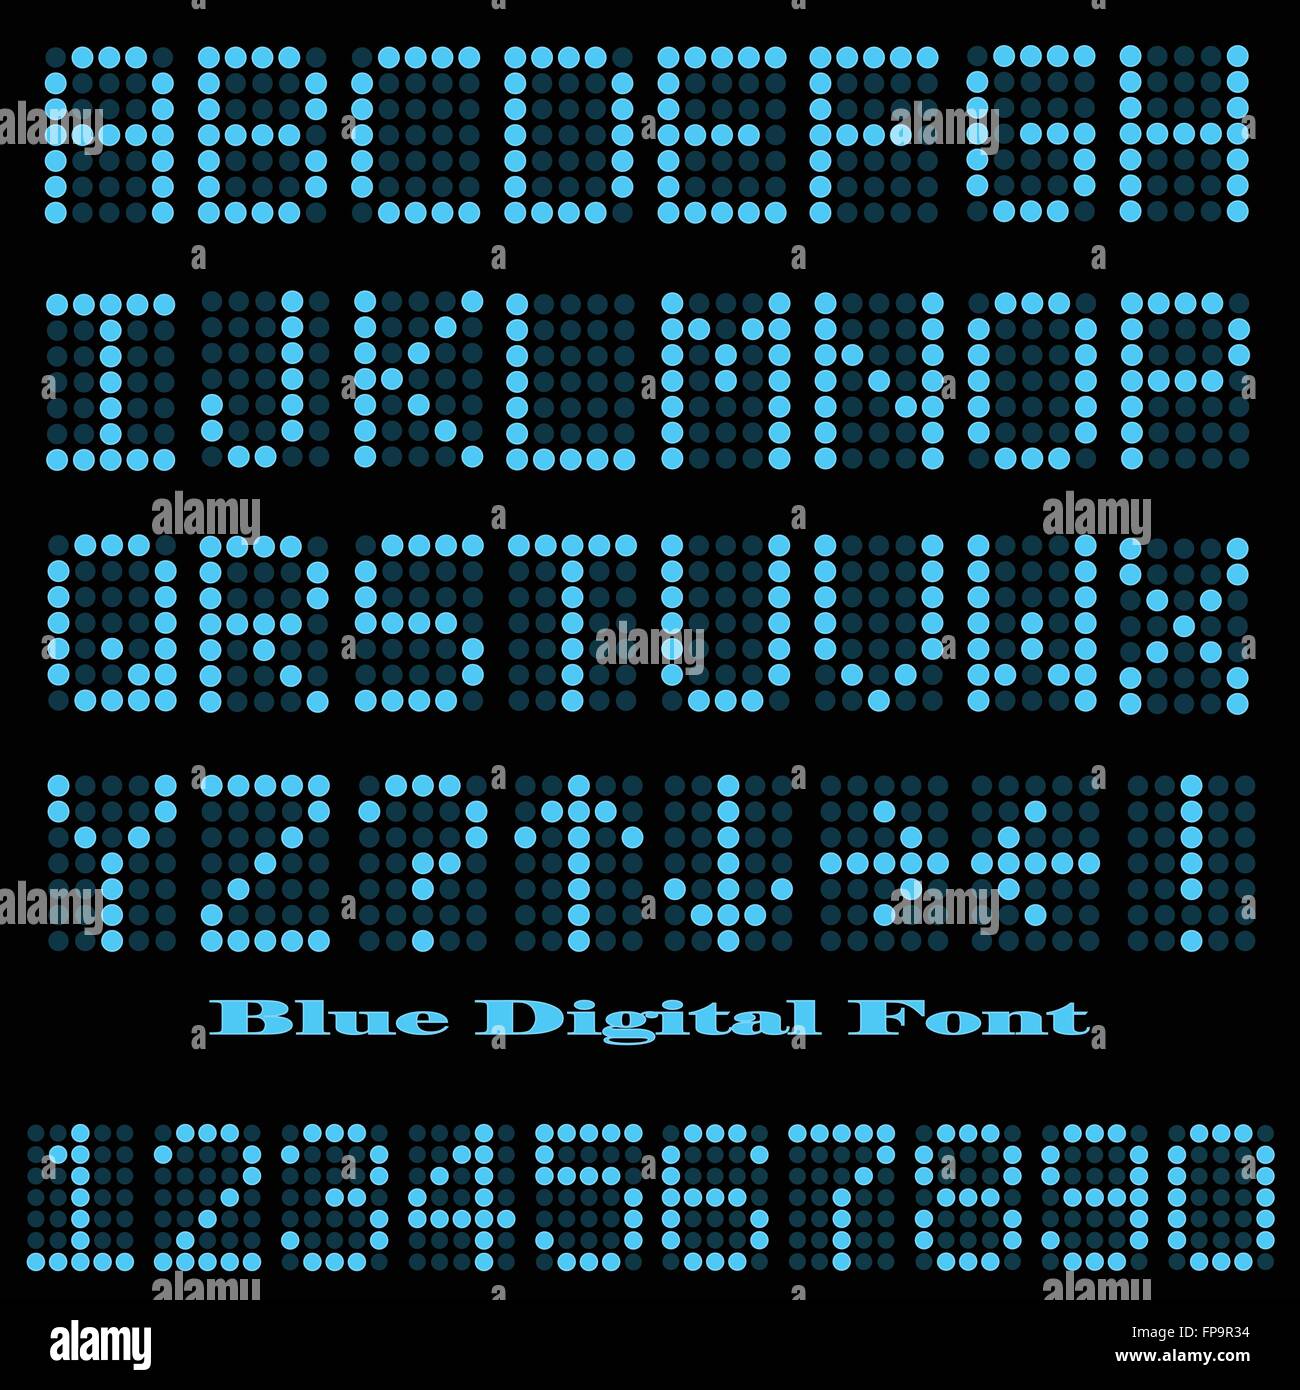 Image of a blue digital font on a dark background. Stock Vector